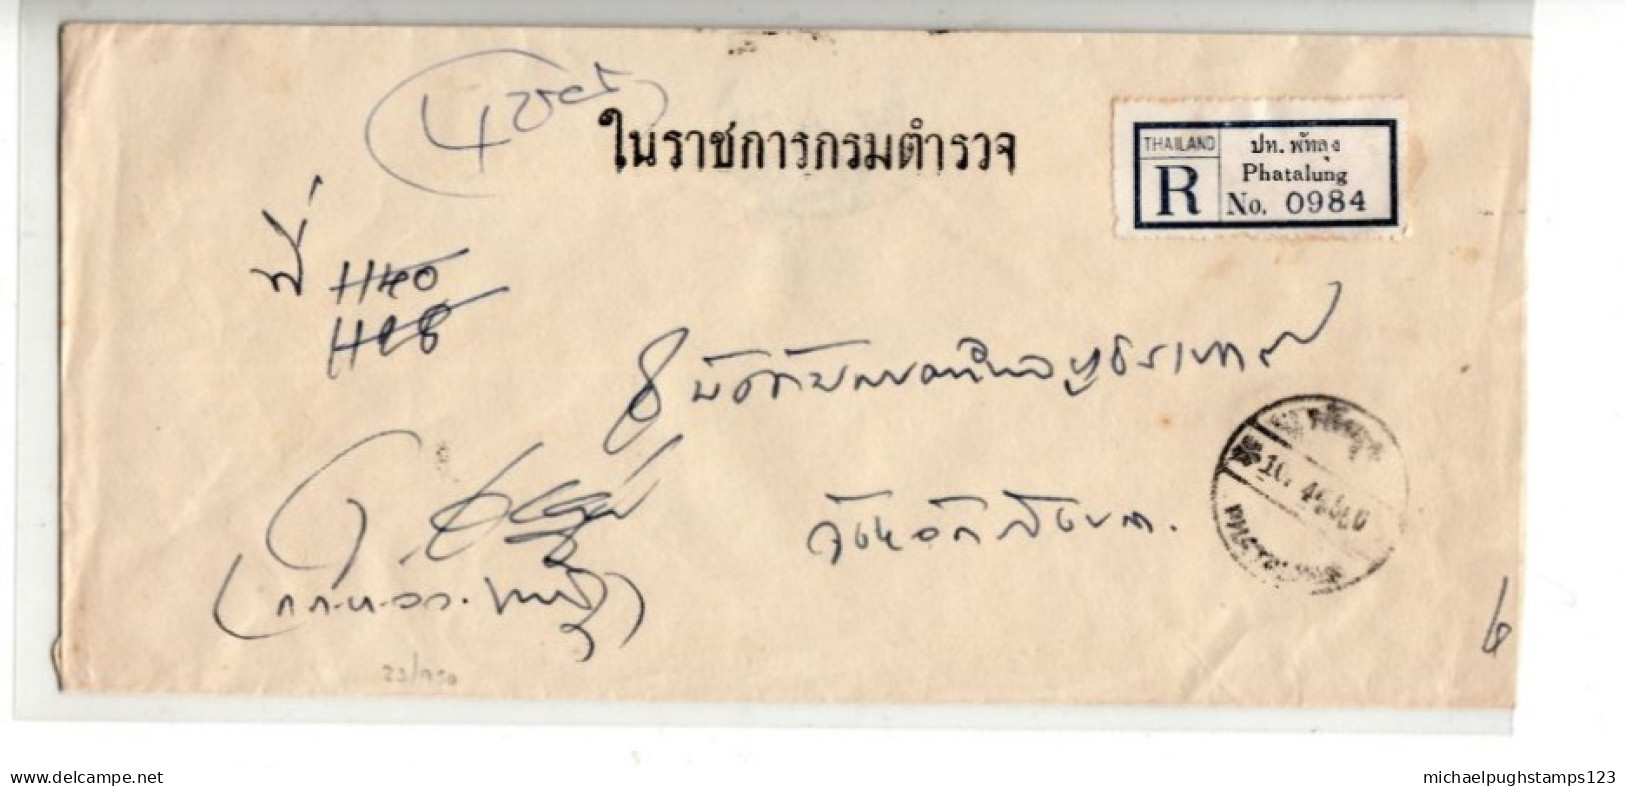 Thailand / Phatalung Registered Official Mail - Thailand